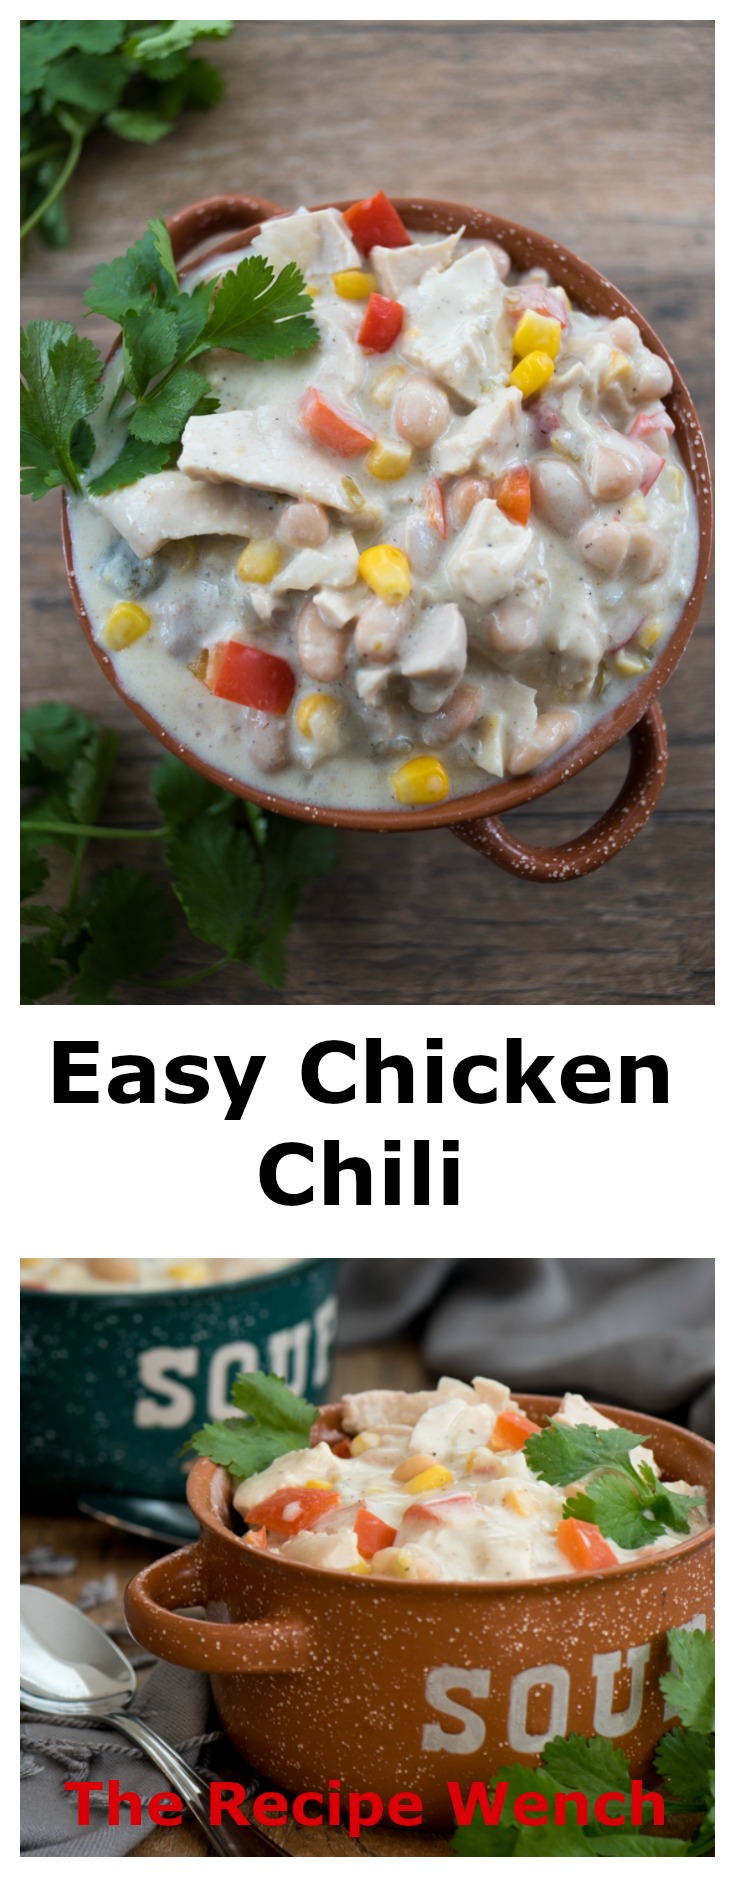 A game day favorite! Chase the winter chills away with easy White Chicken Chili! | www.therecipewench.com